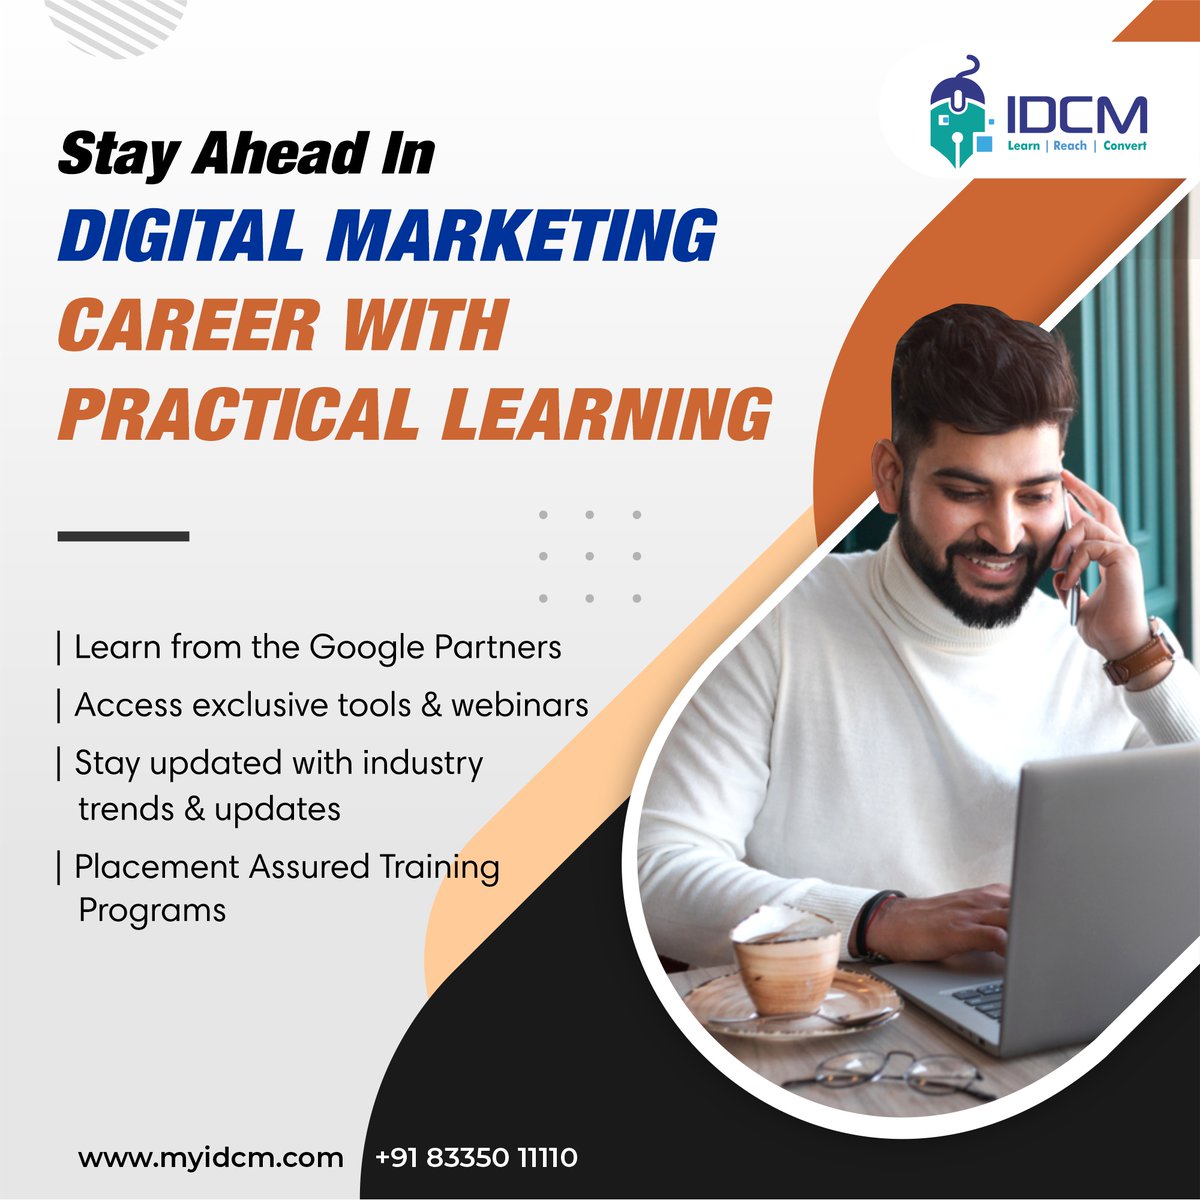 Enroll in our placement assured training programs and pave the way for a successful digital marketing career! 💡💪

To know more: ow.ly/IkhU50OmoMR

#myIDCM #LearnWithIDCM #DigitalMarketing #IAmDigitalReady #WinningStrokewithIDCM #SaturdaySwag #Saturday